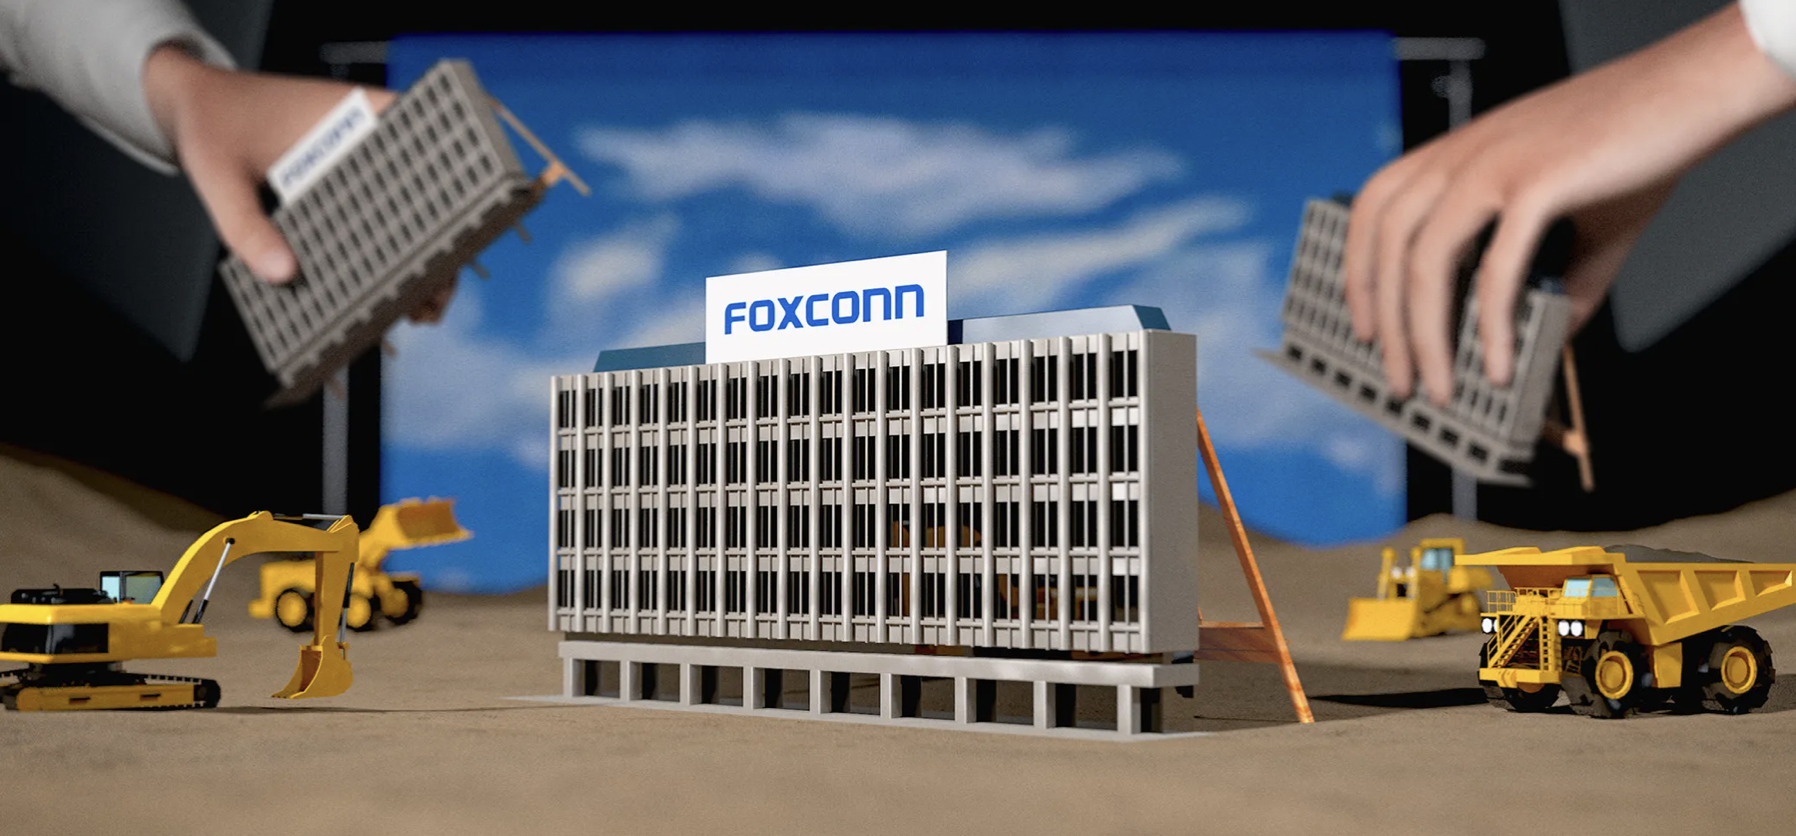 apple foxconn flags issues